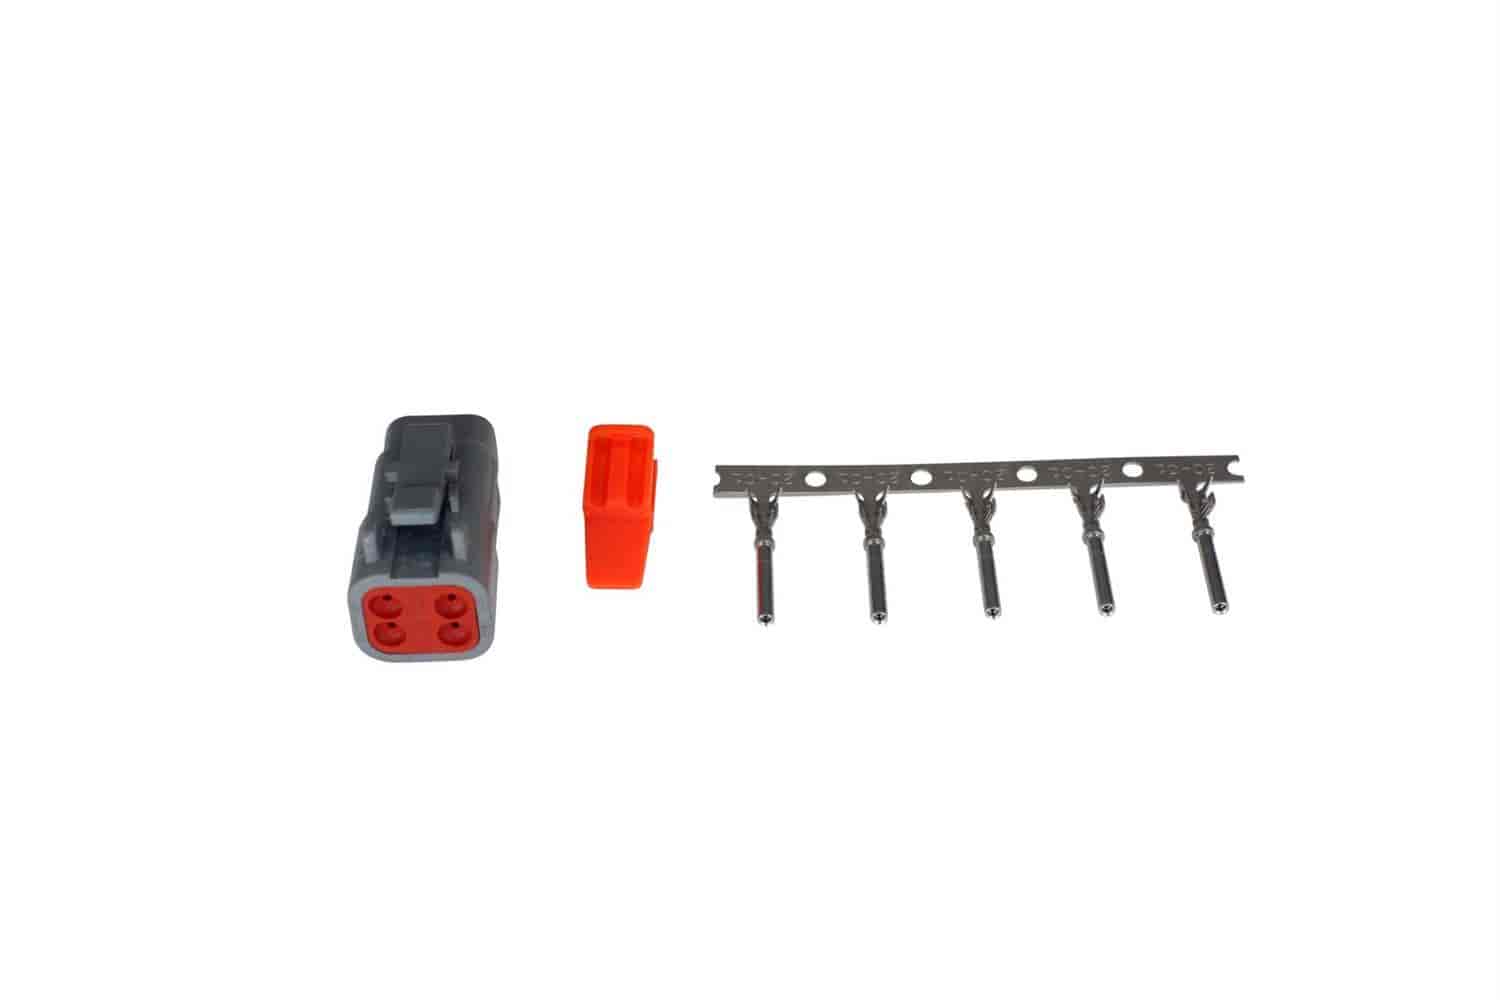 DTM-Style 4-Way Plug Connector Kit Includes Plug, Plug Wedge Lock And 5 Female Pins